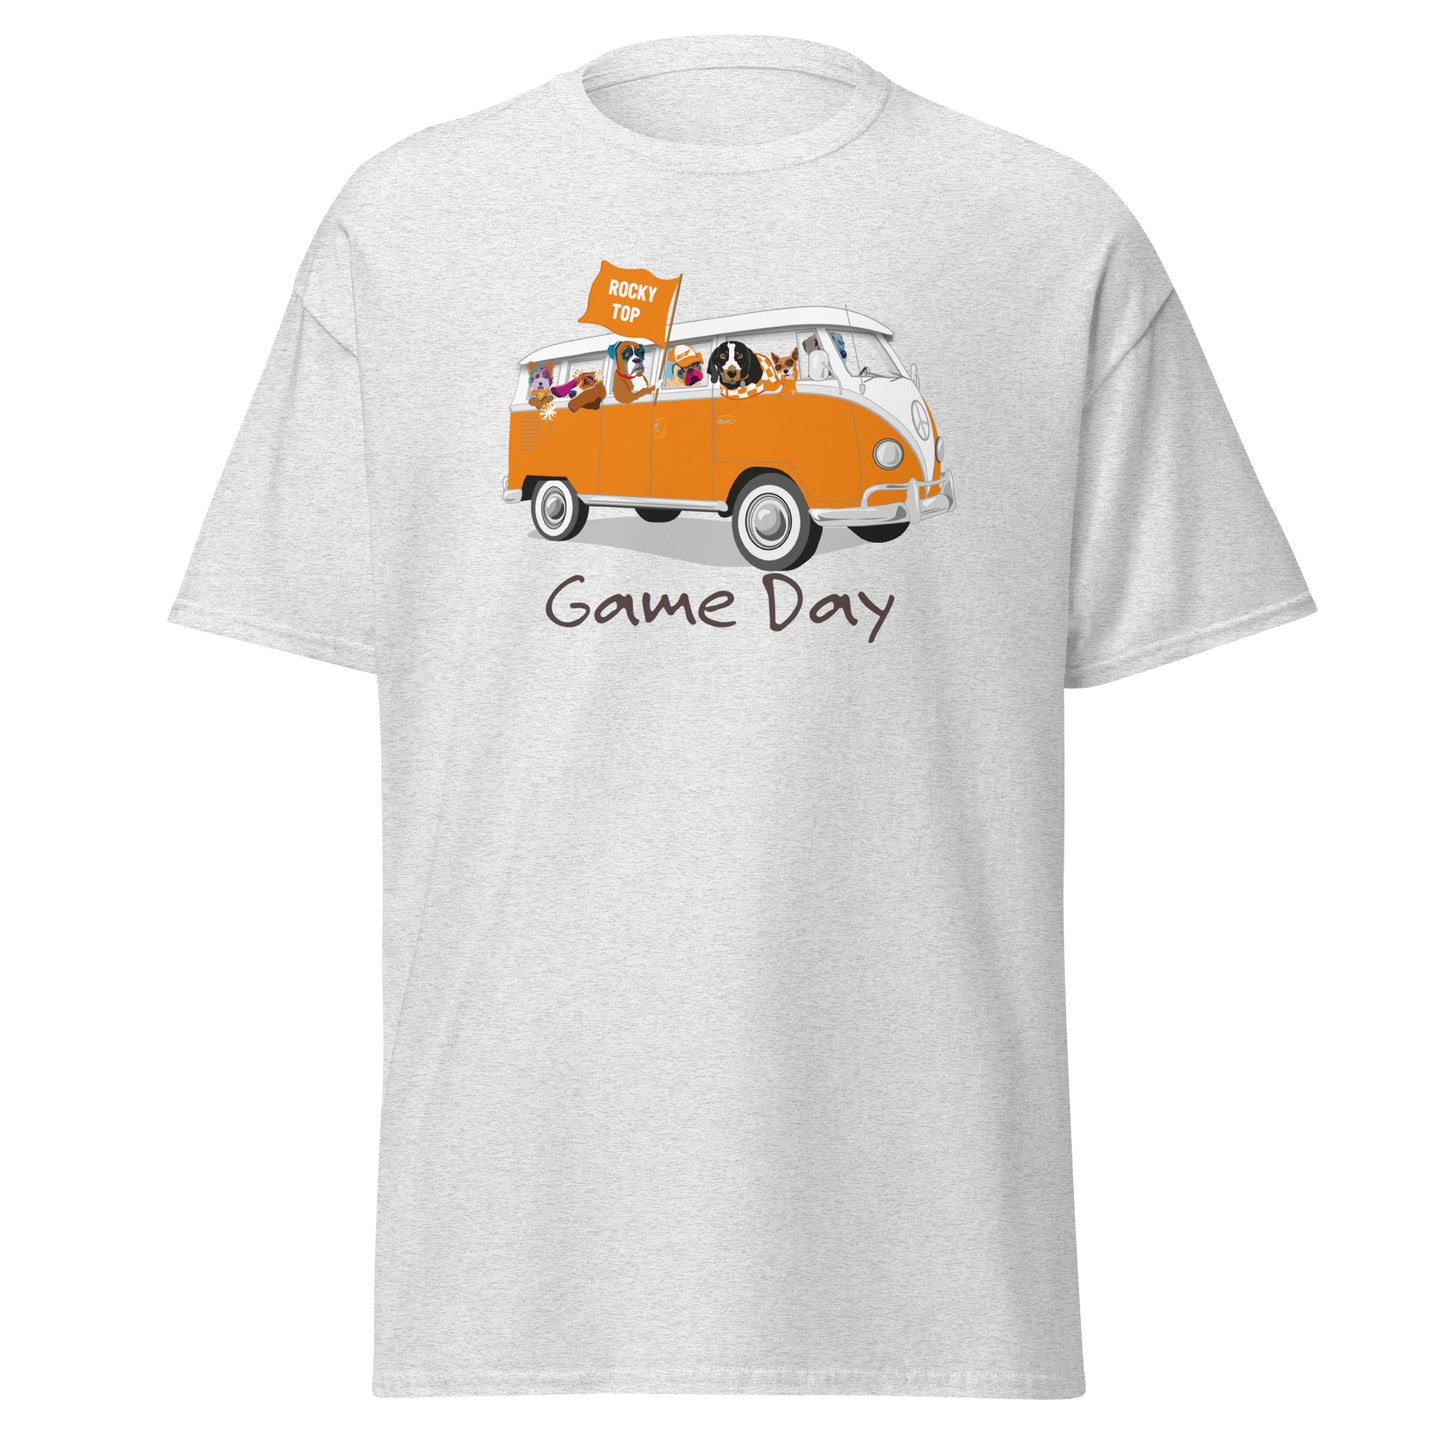 Men's classic tee Game Day in Tennessee party bus